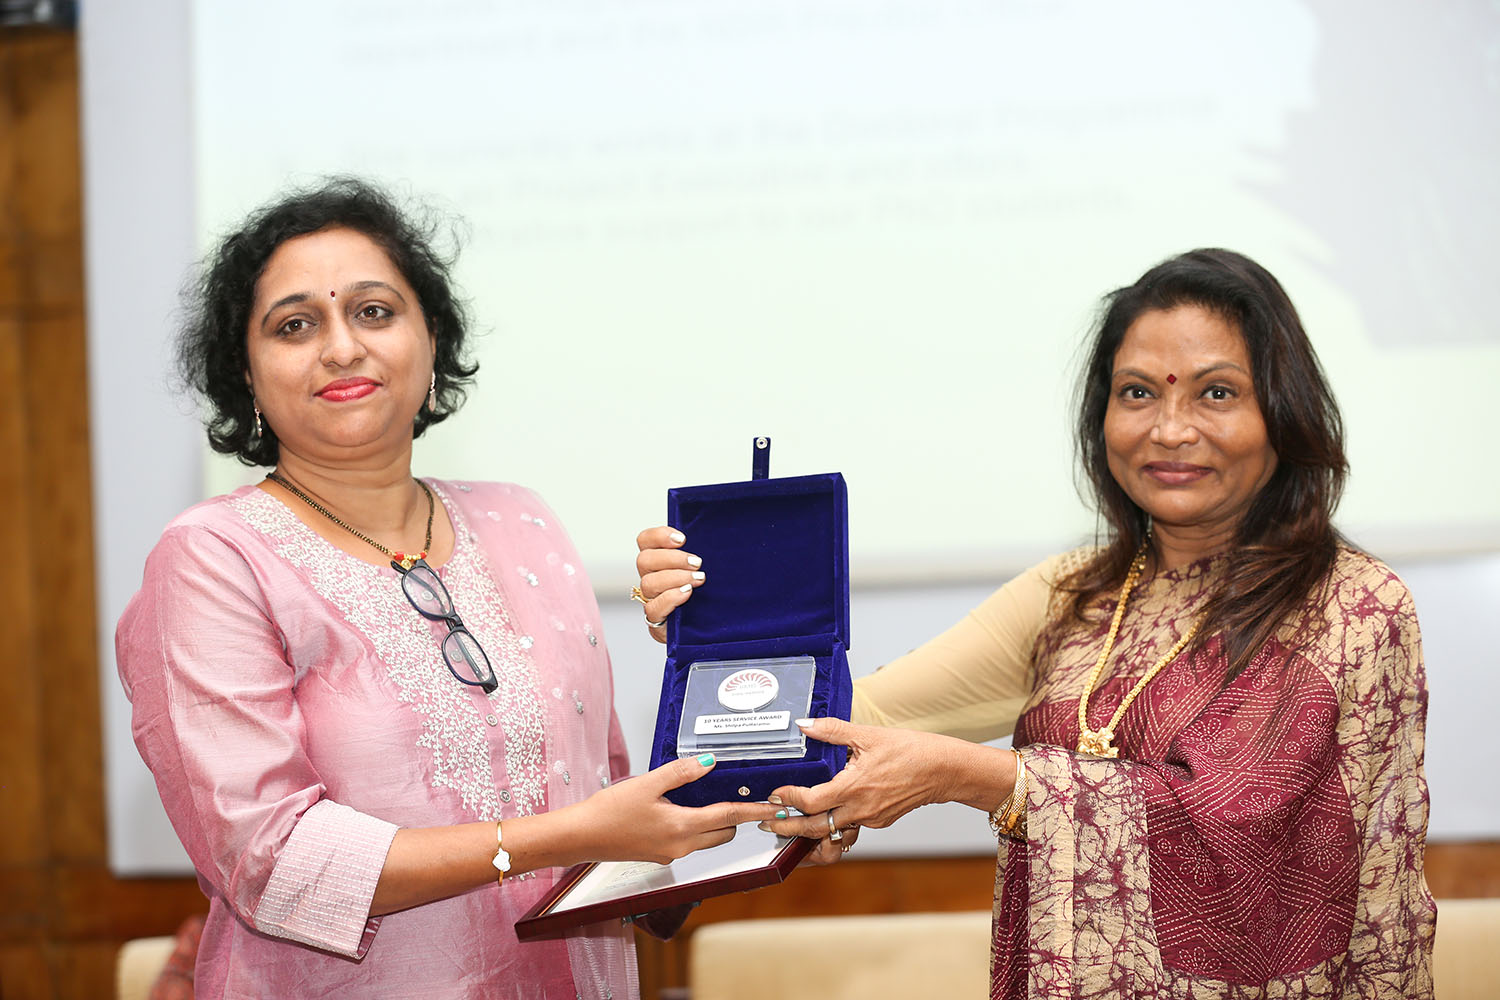 Ms Shilpa Puttaramu, Project Executive, Doctoral Programme Office, receives the award for 10 years of service from Ms. Kalpana Saroj, Member of the Board of Governors, IIMB during the institute’s 49th Foundation Day celebrations.